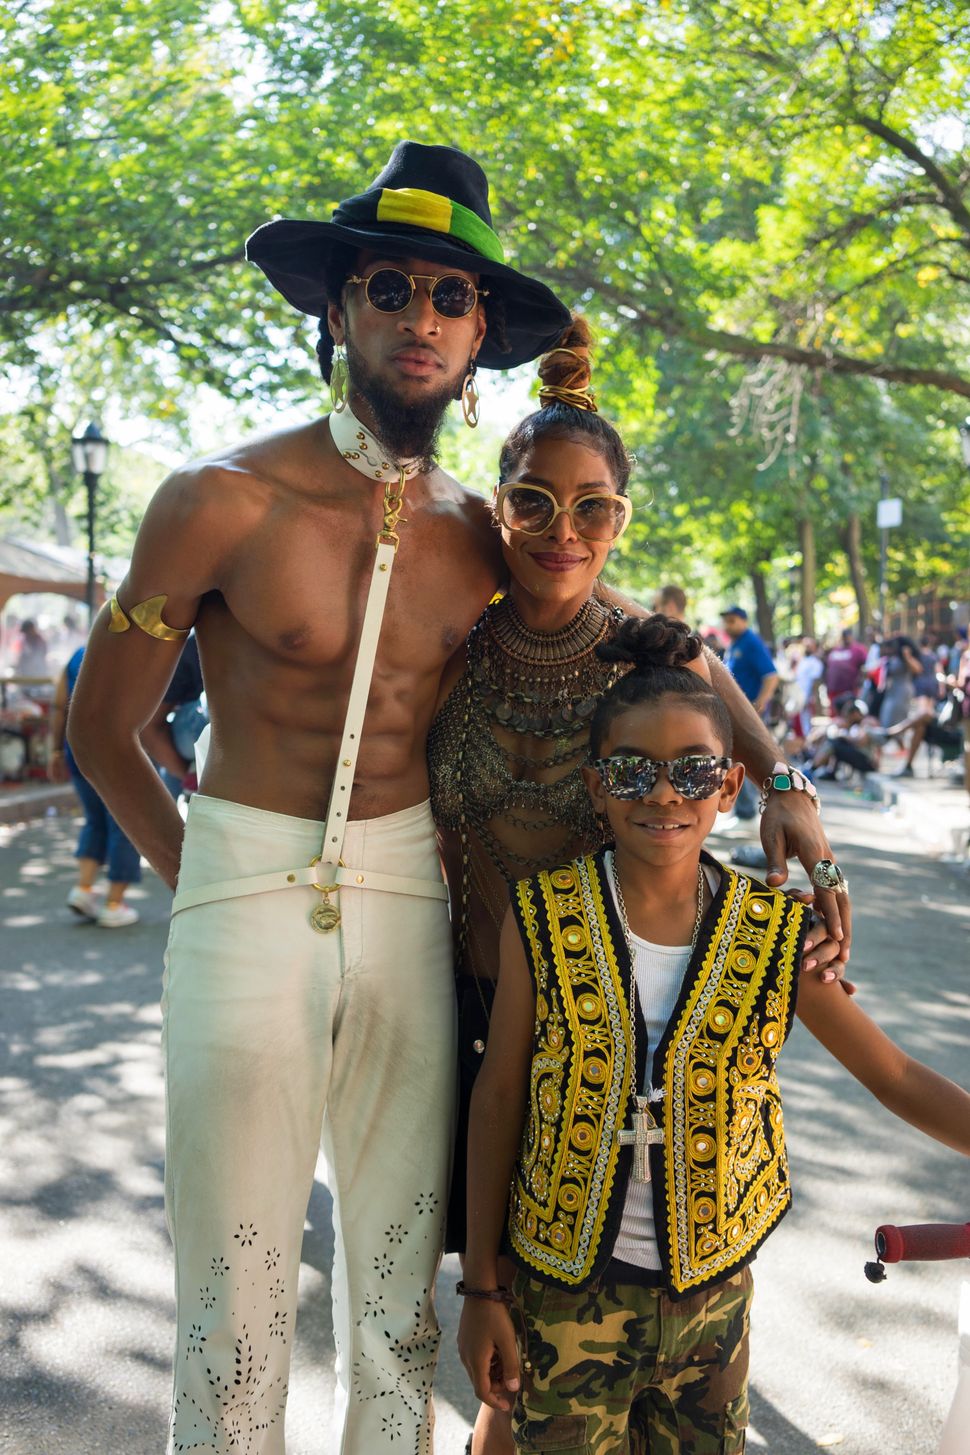 Family: Greg Banks, Marlene and their son photographed at the West Indian Day Parade in Brooklyn, New York, in 2017.